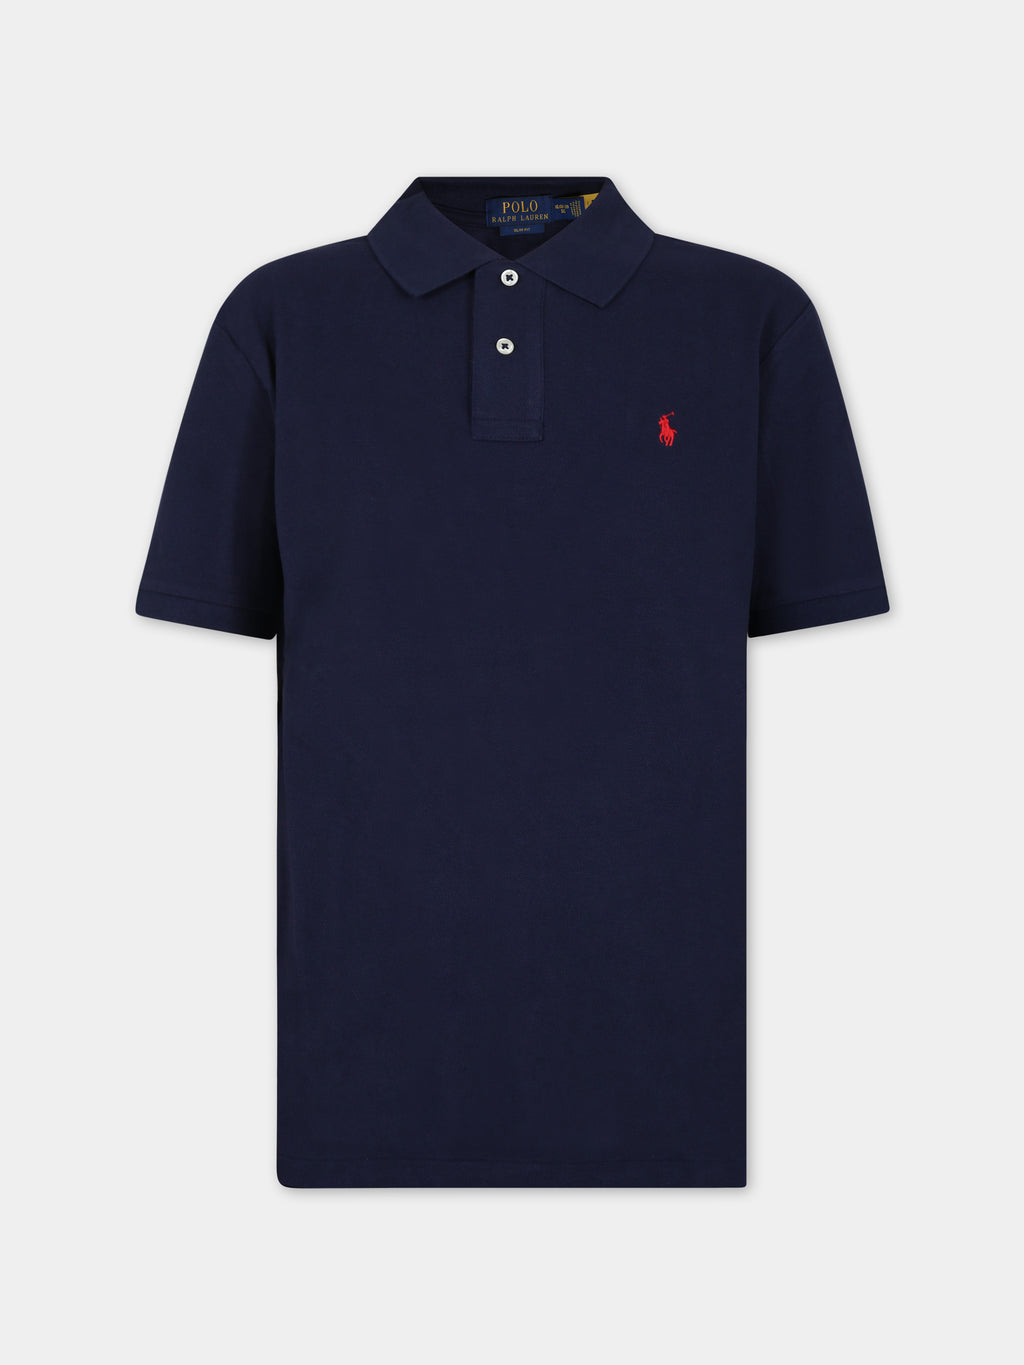 Blue polo shiirt for boy with iconic pony